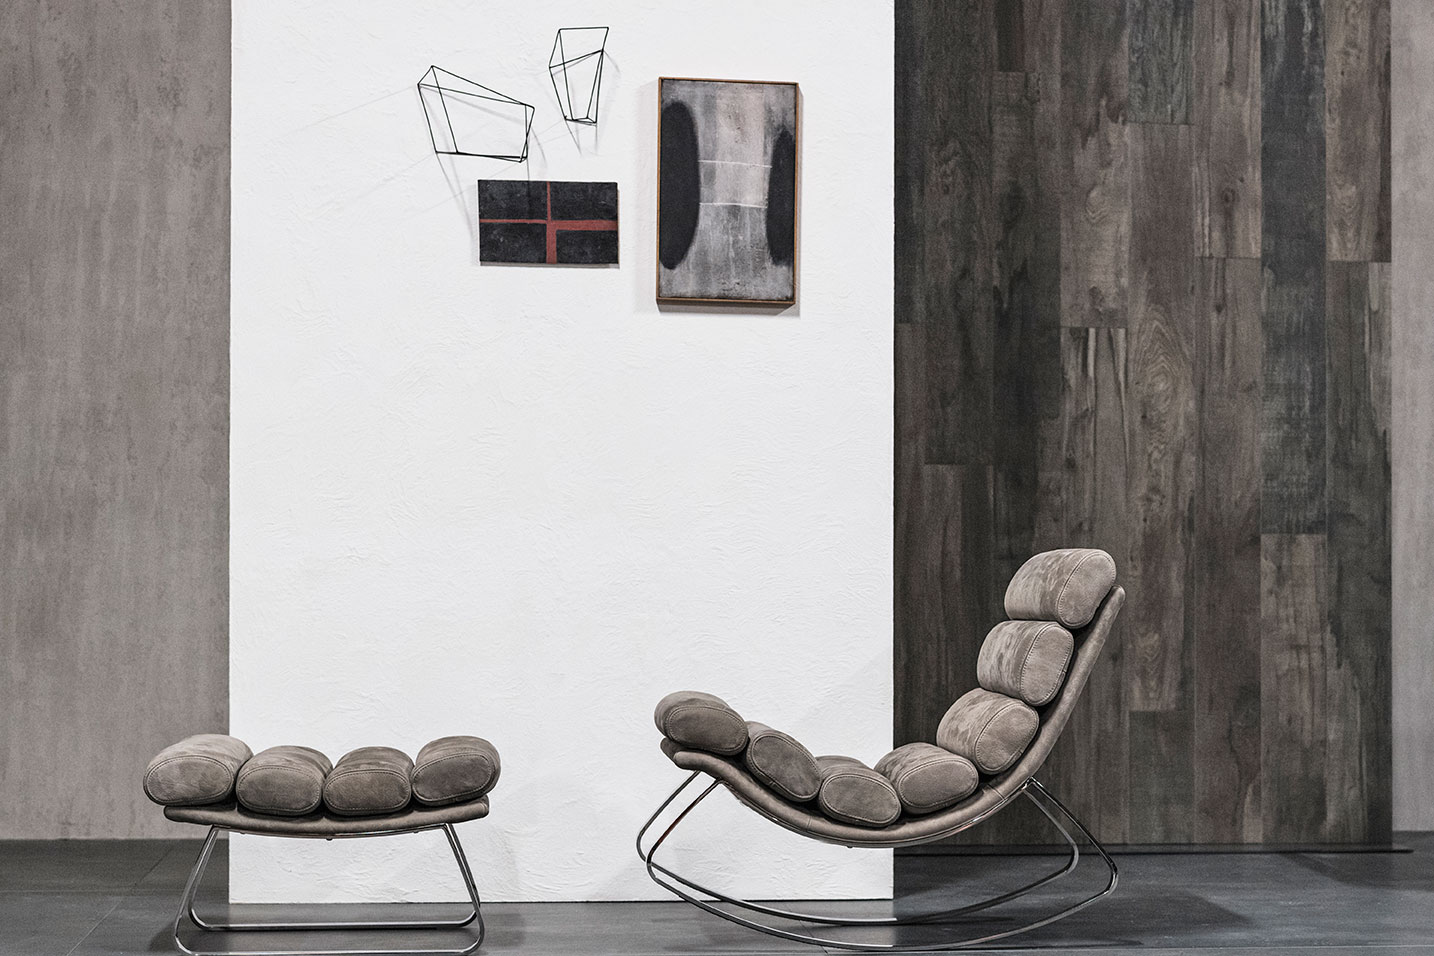 Luxurious rocking chair designed by Stefano Conficconi. wood, chrome metal and nubuck leather. Shop for modern Italian furniture. Free home delivery.